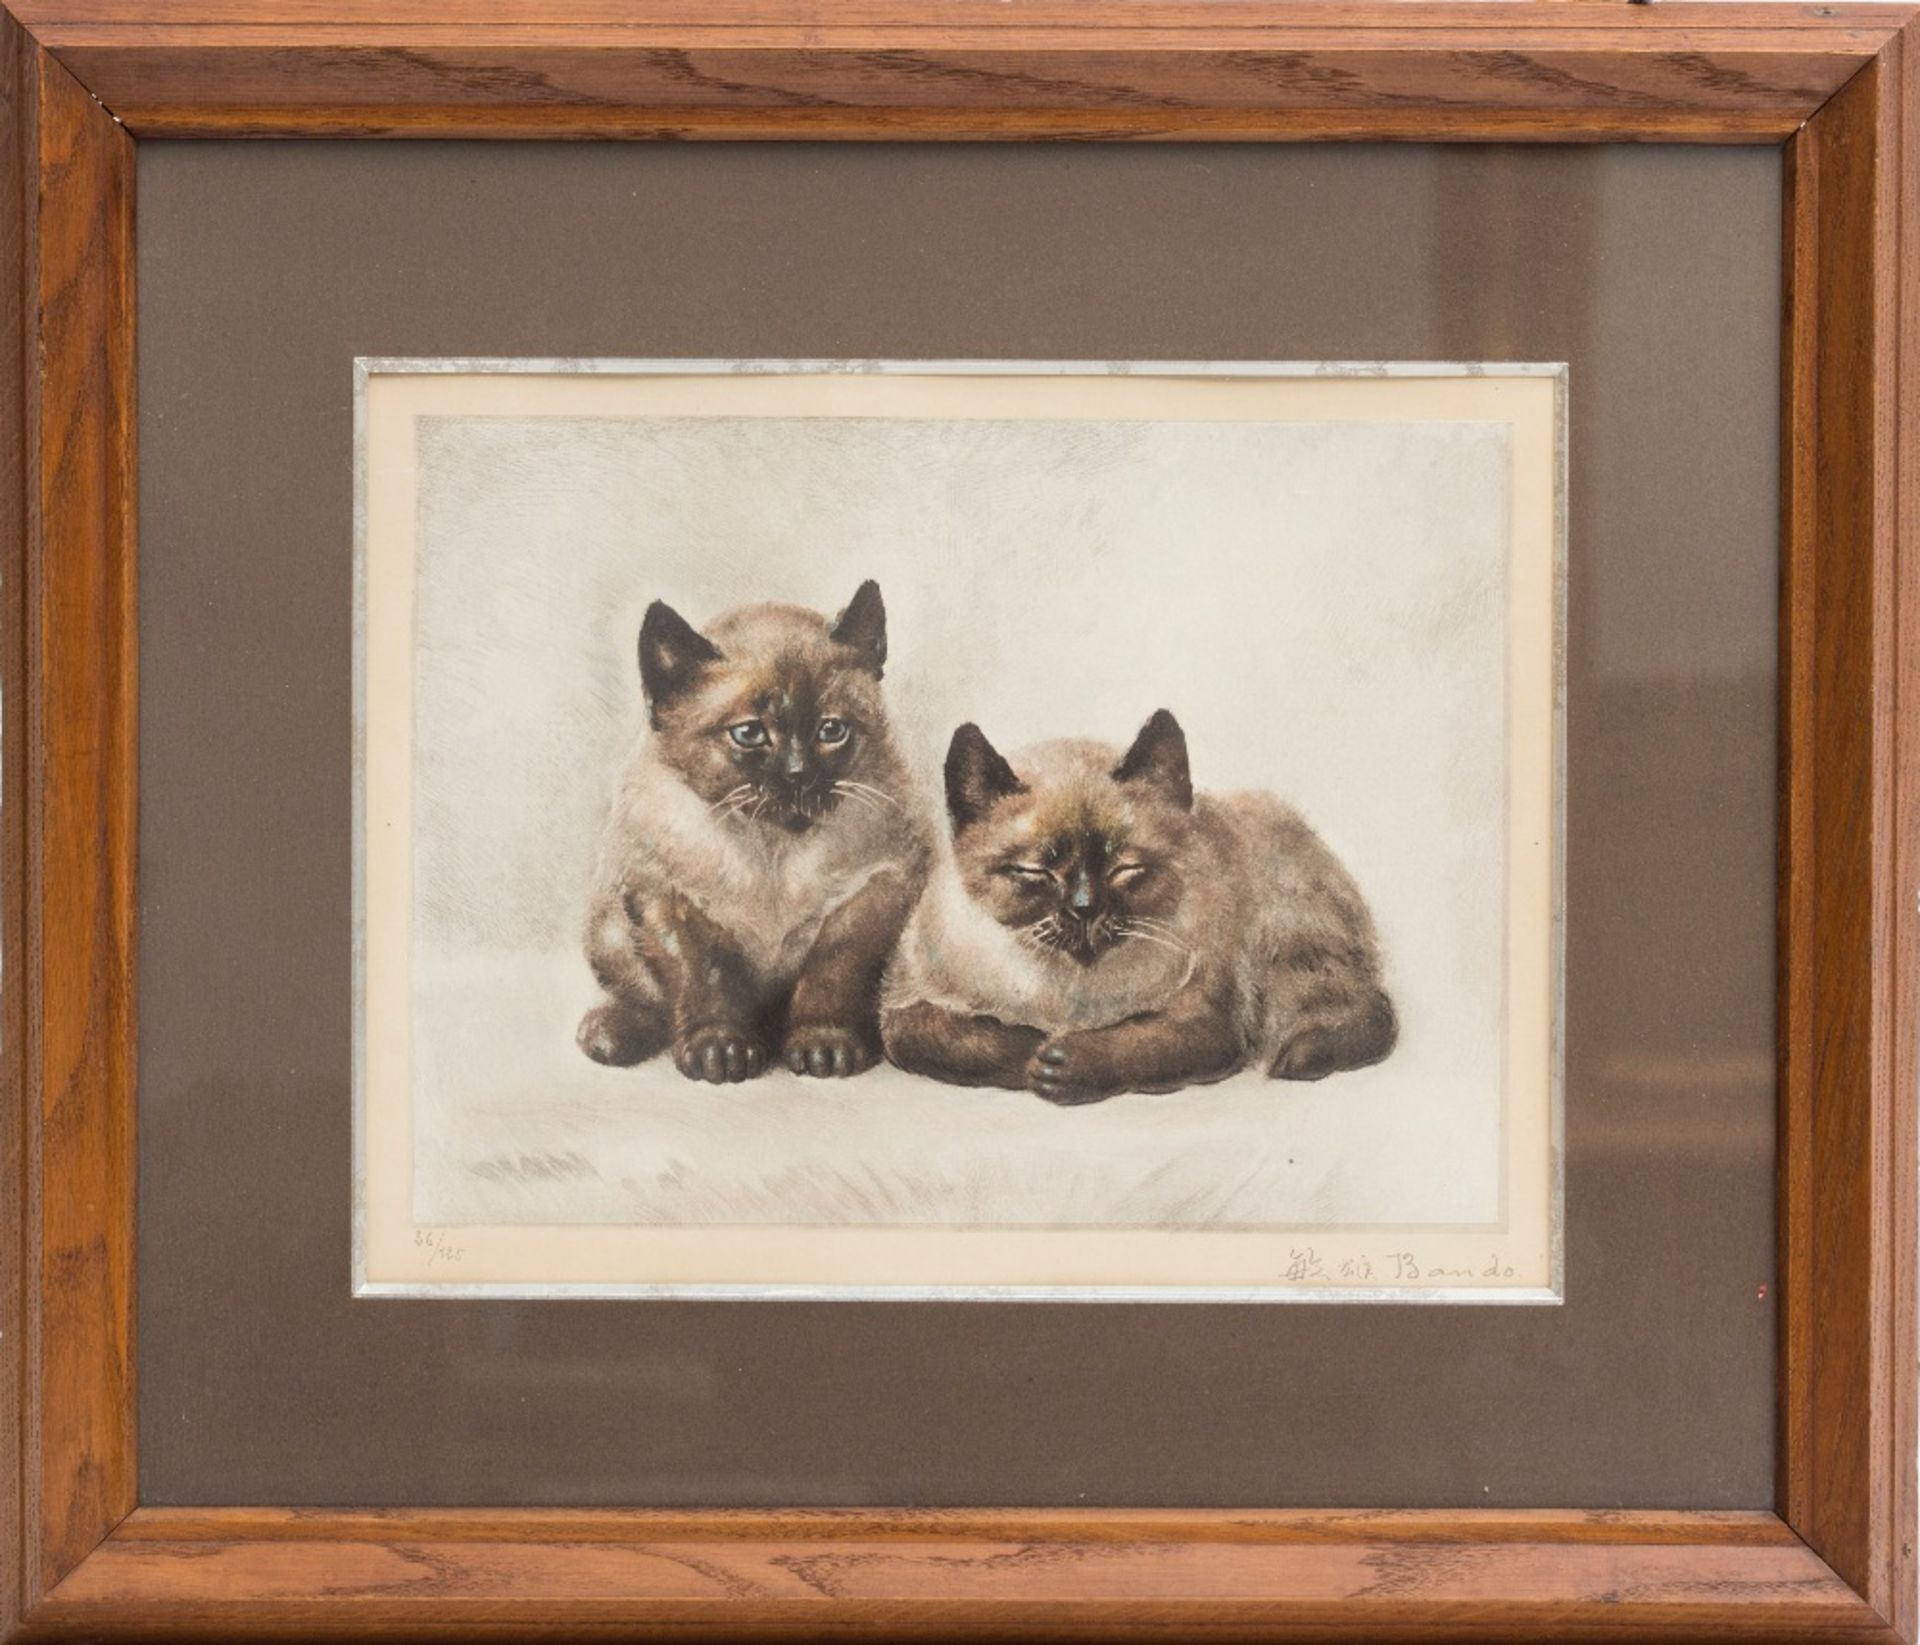 Toshio Bando (Japan 1895-1973)The kittens; Soft-ground, dry-point engraving. Signed in the margin